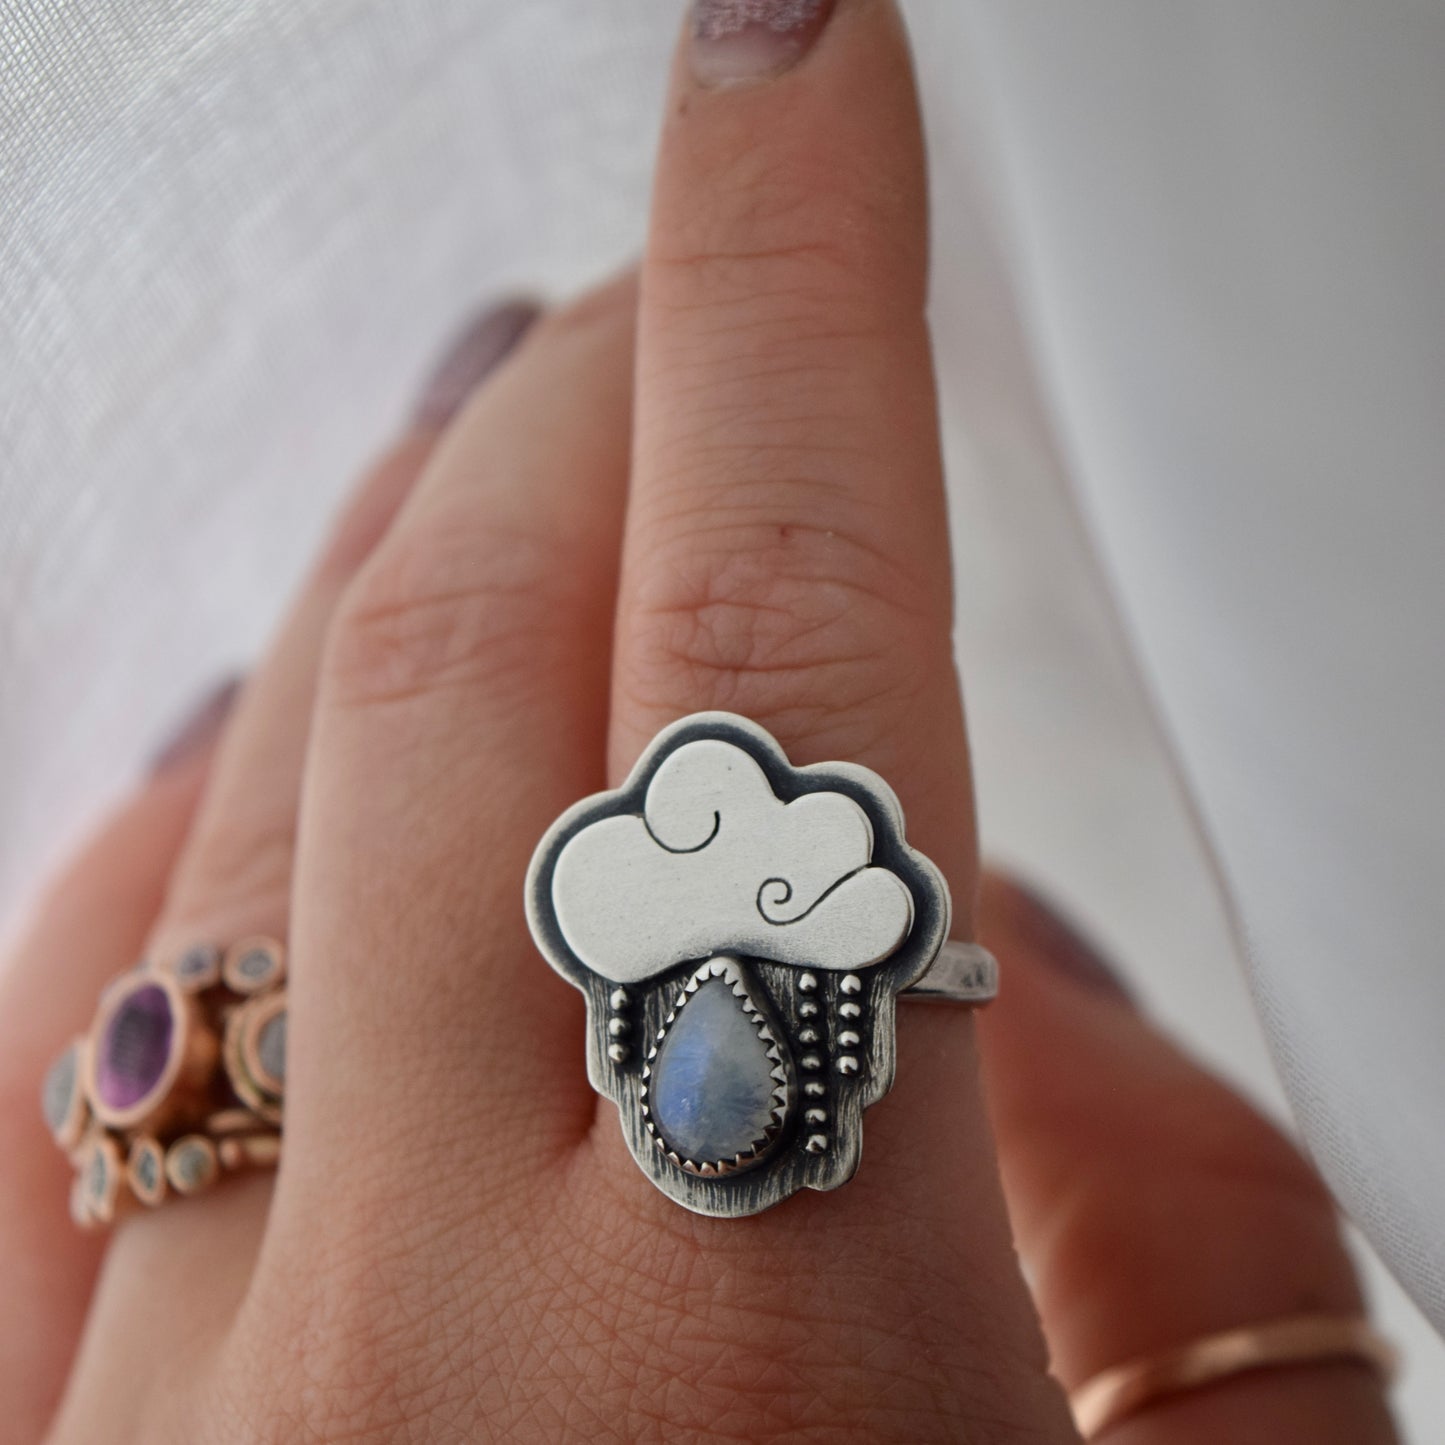 Little Dark Cloud Ring with Rainbow Moonstone size 7